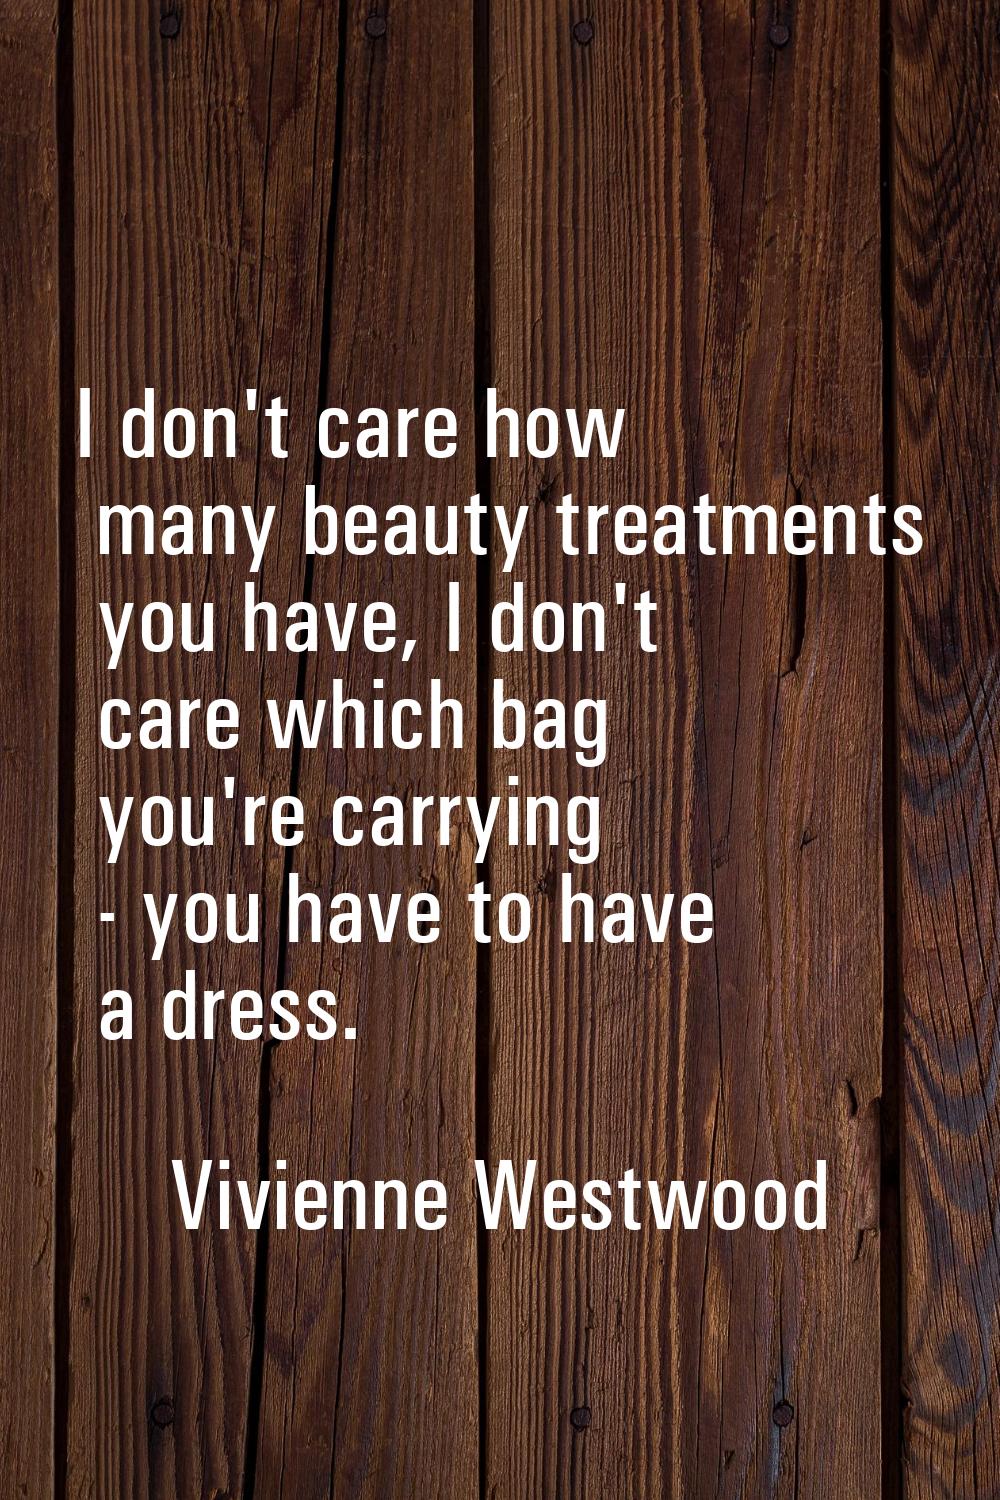 I don't care how many beauty treatments you have, I don't care which bag you're carrying - you have